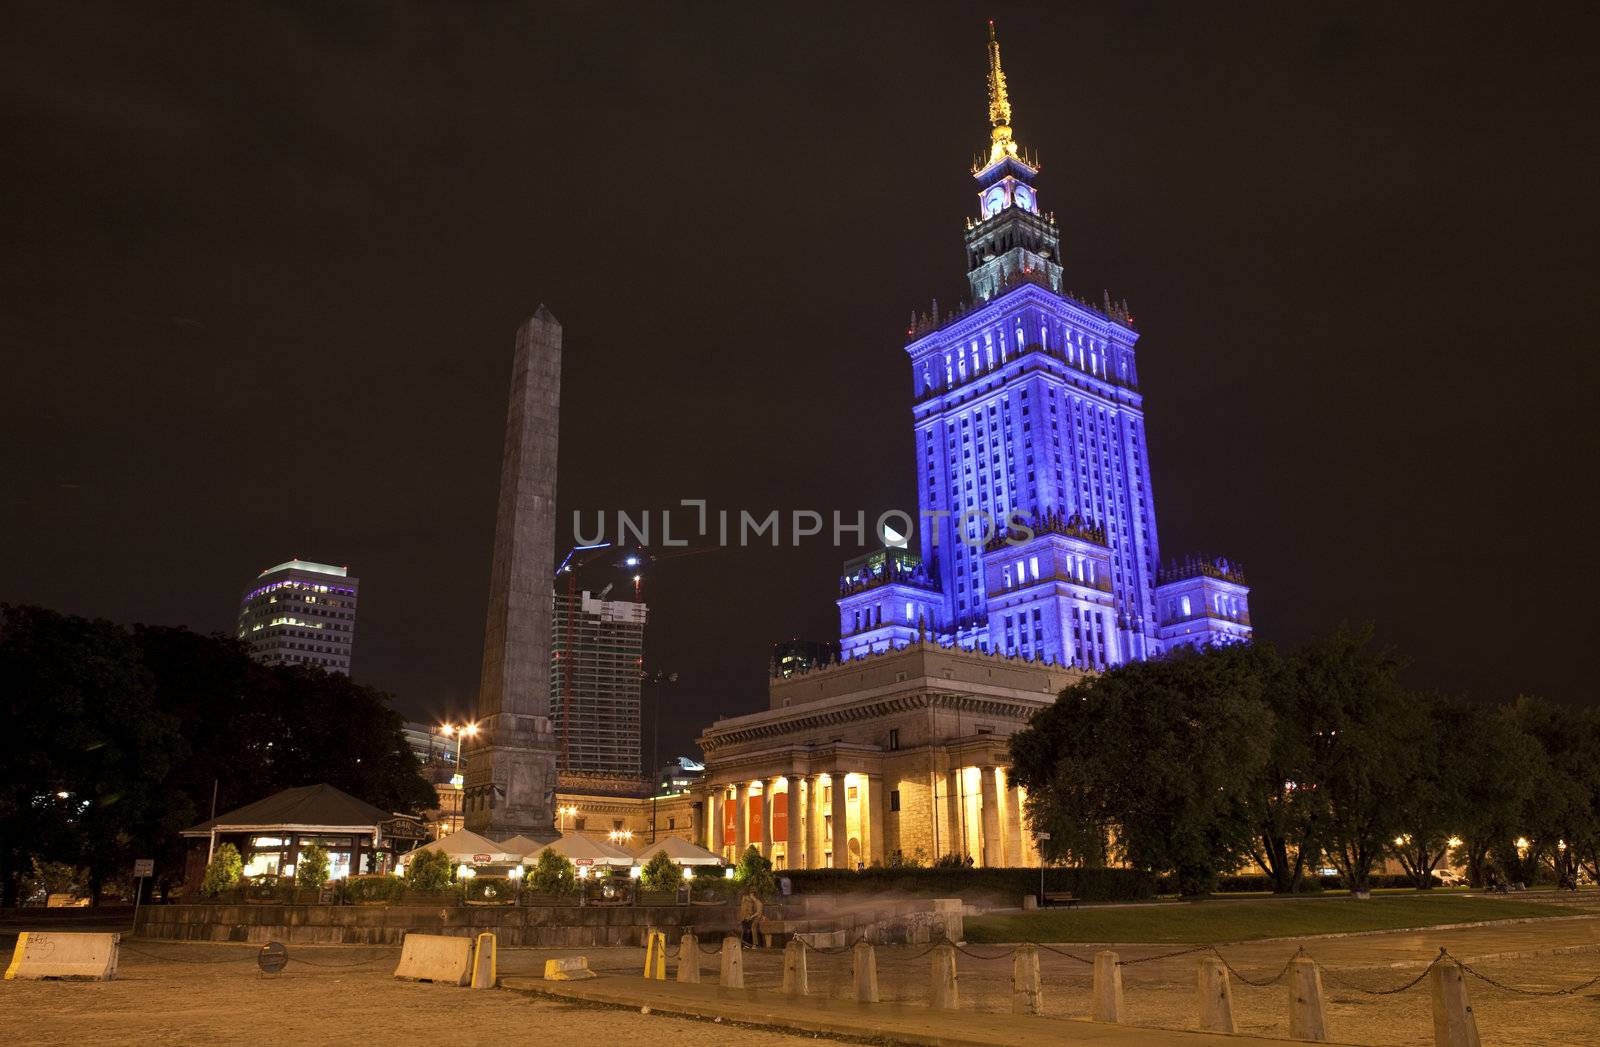 Palace of Culture and Science in Warsaw by chrisdorney